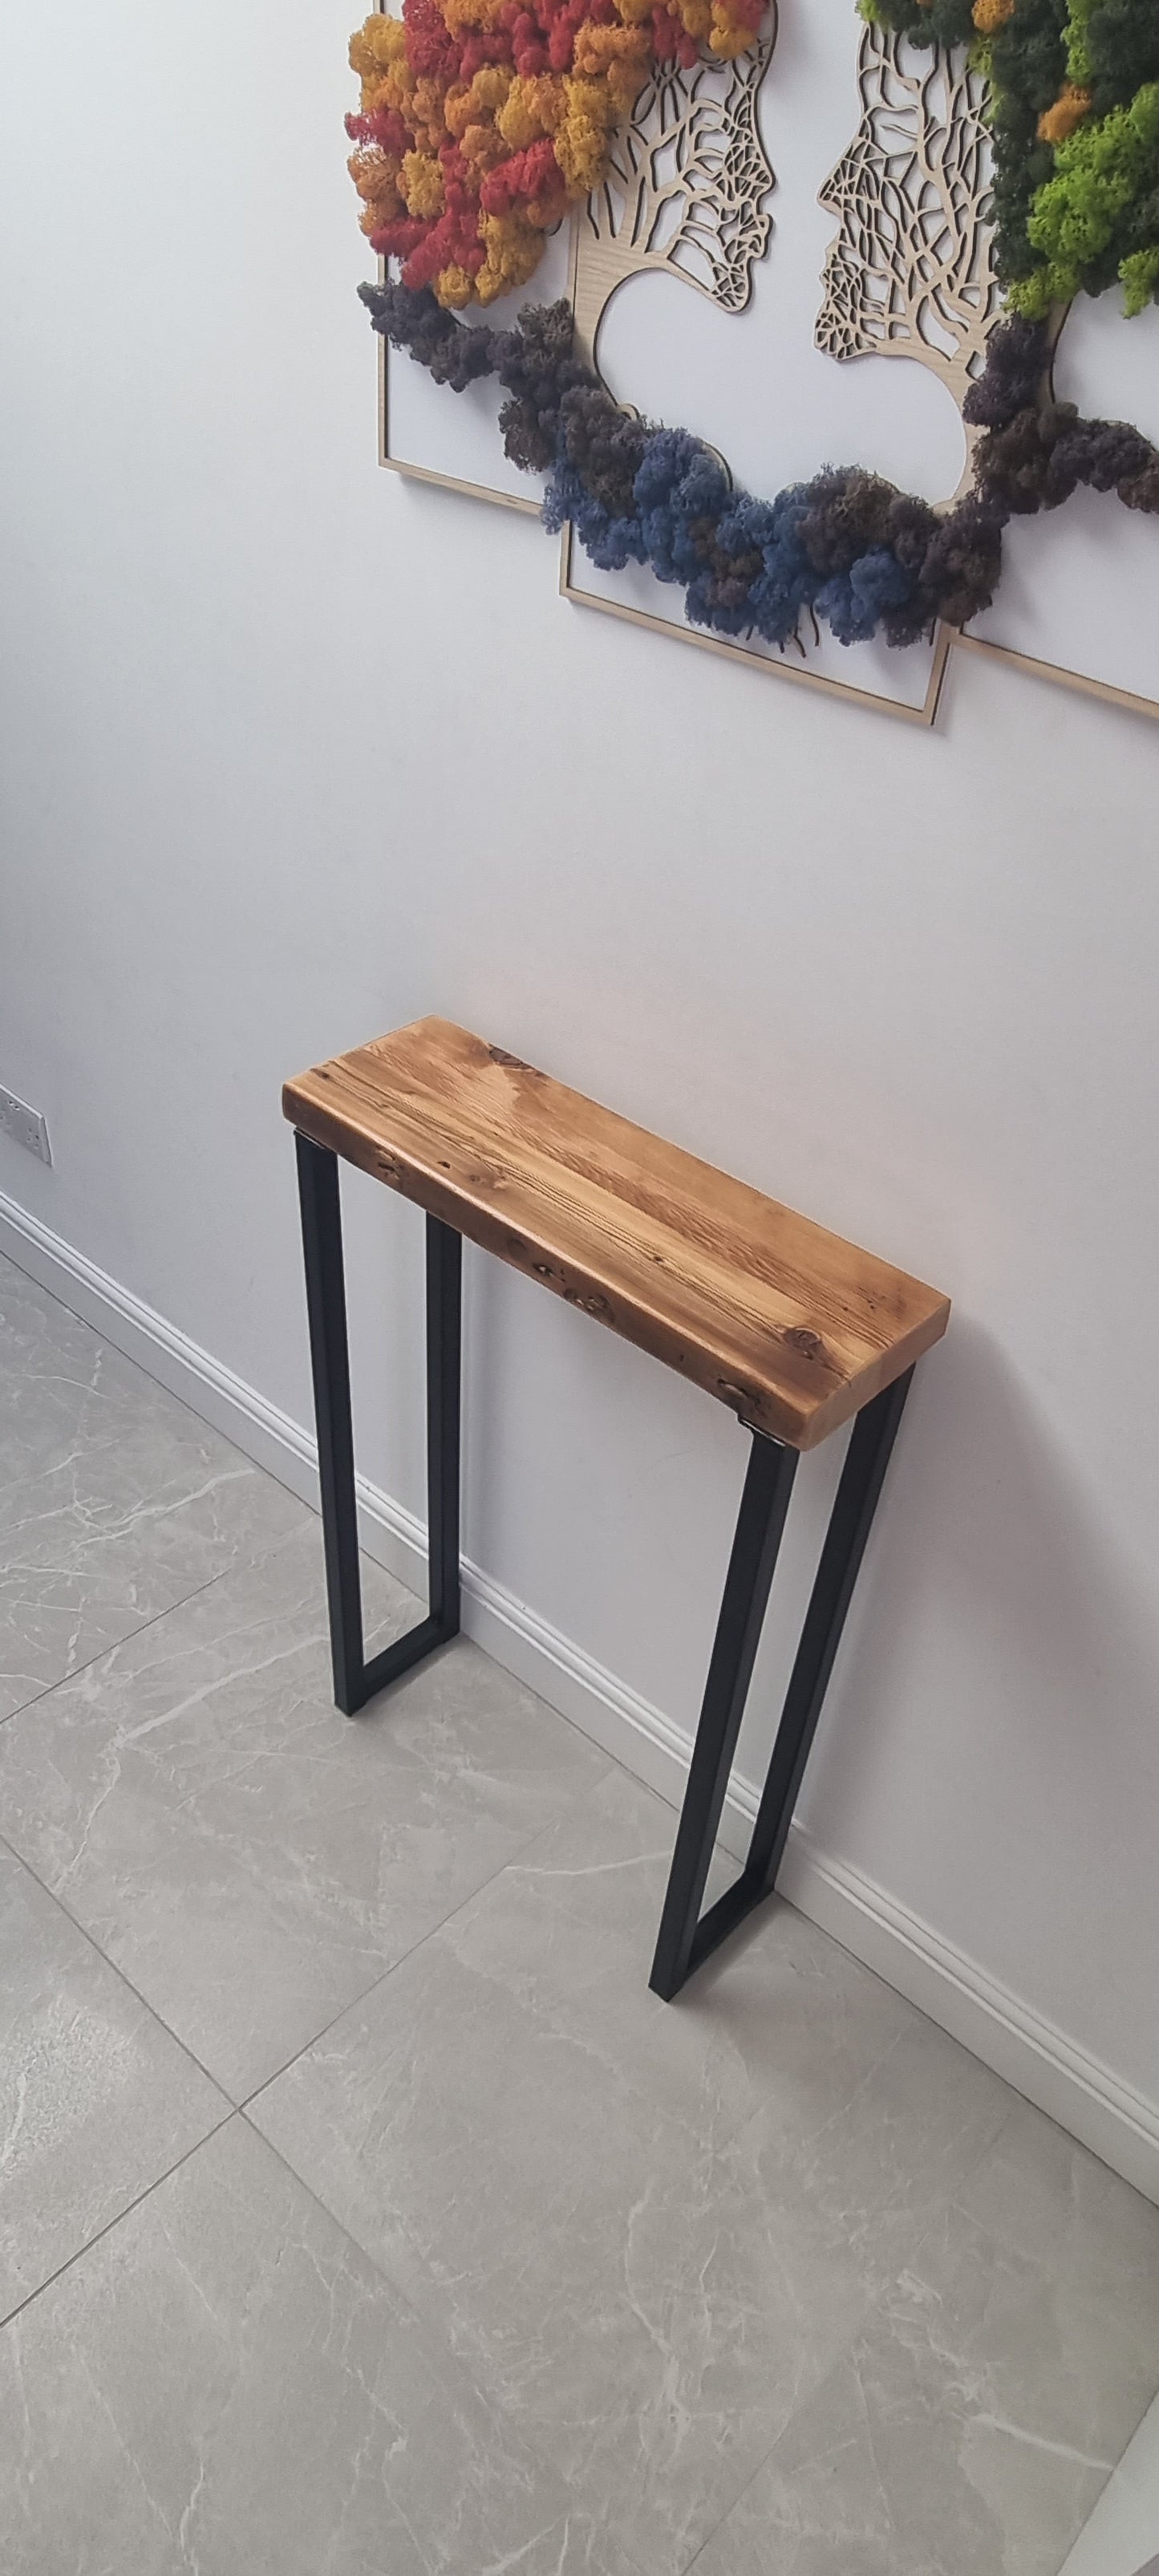 Narrow console table with square legs